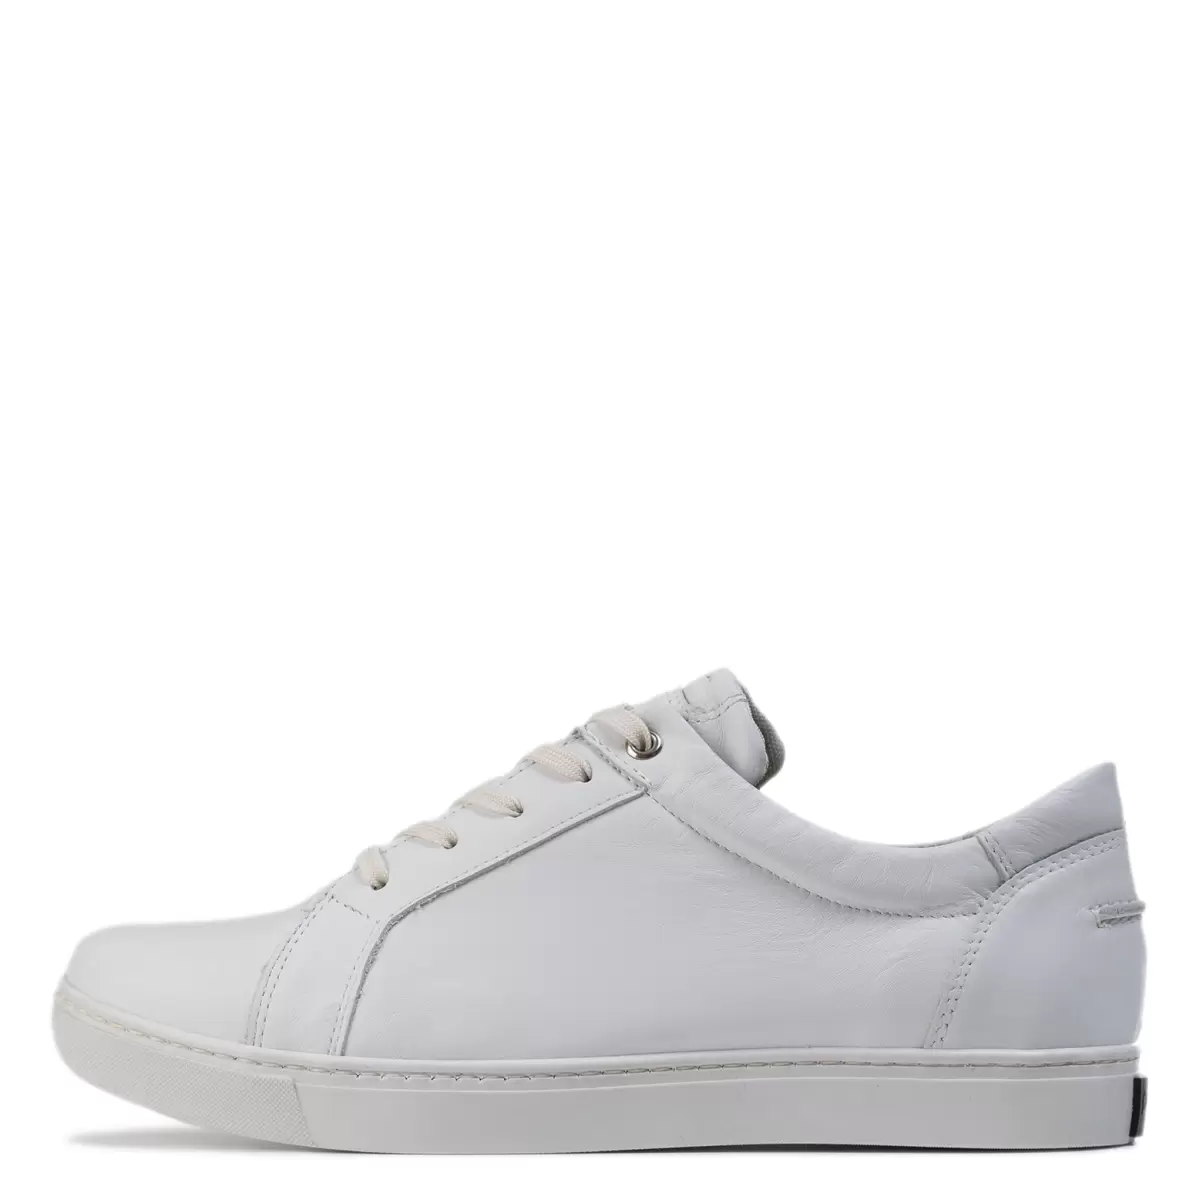 White Soft Nappa Aho Men’s Leather Sneakers Pomarfin Oy Sneakers Men